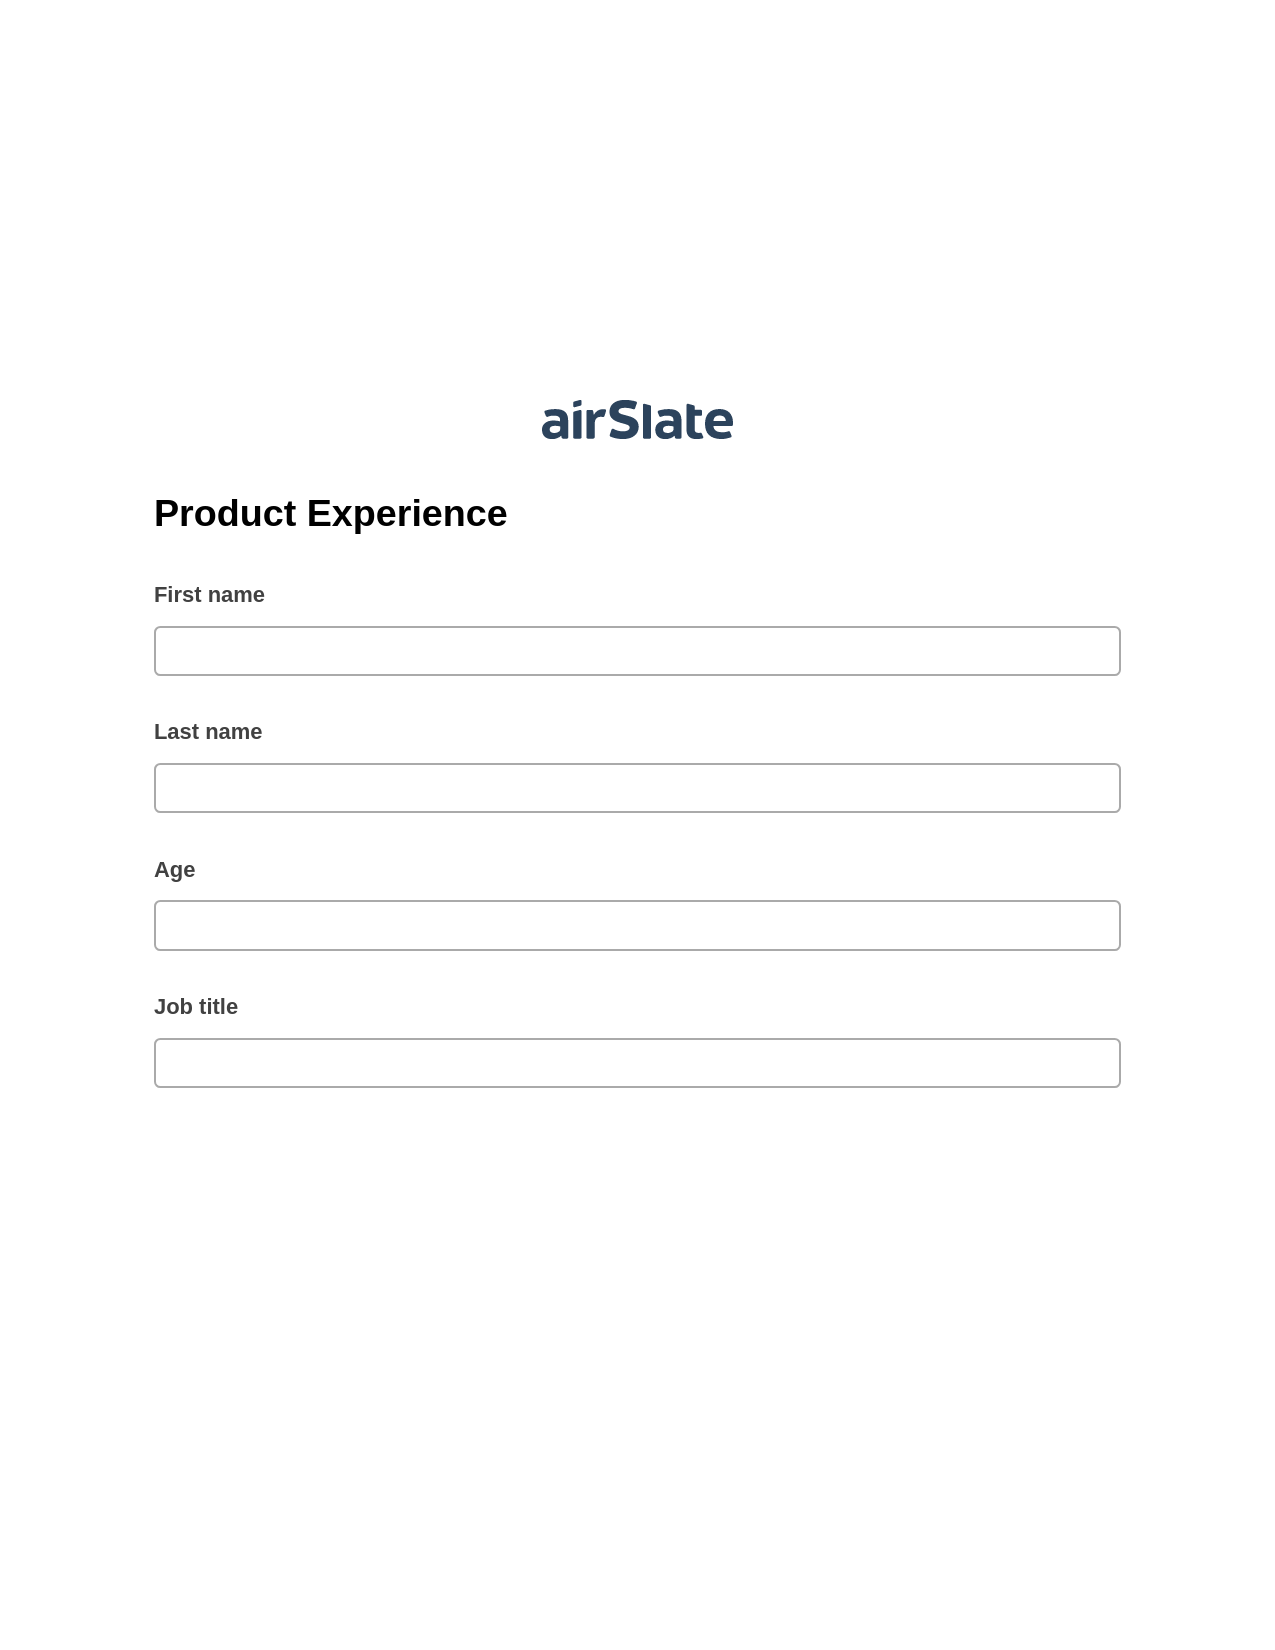 Product Experience Pre-fill Document Bot, Webhook Bot, Email Notification Postfinish Bot